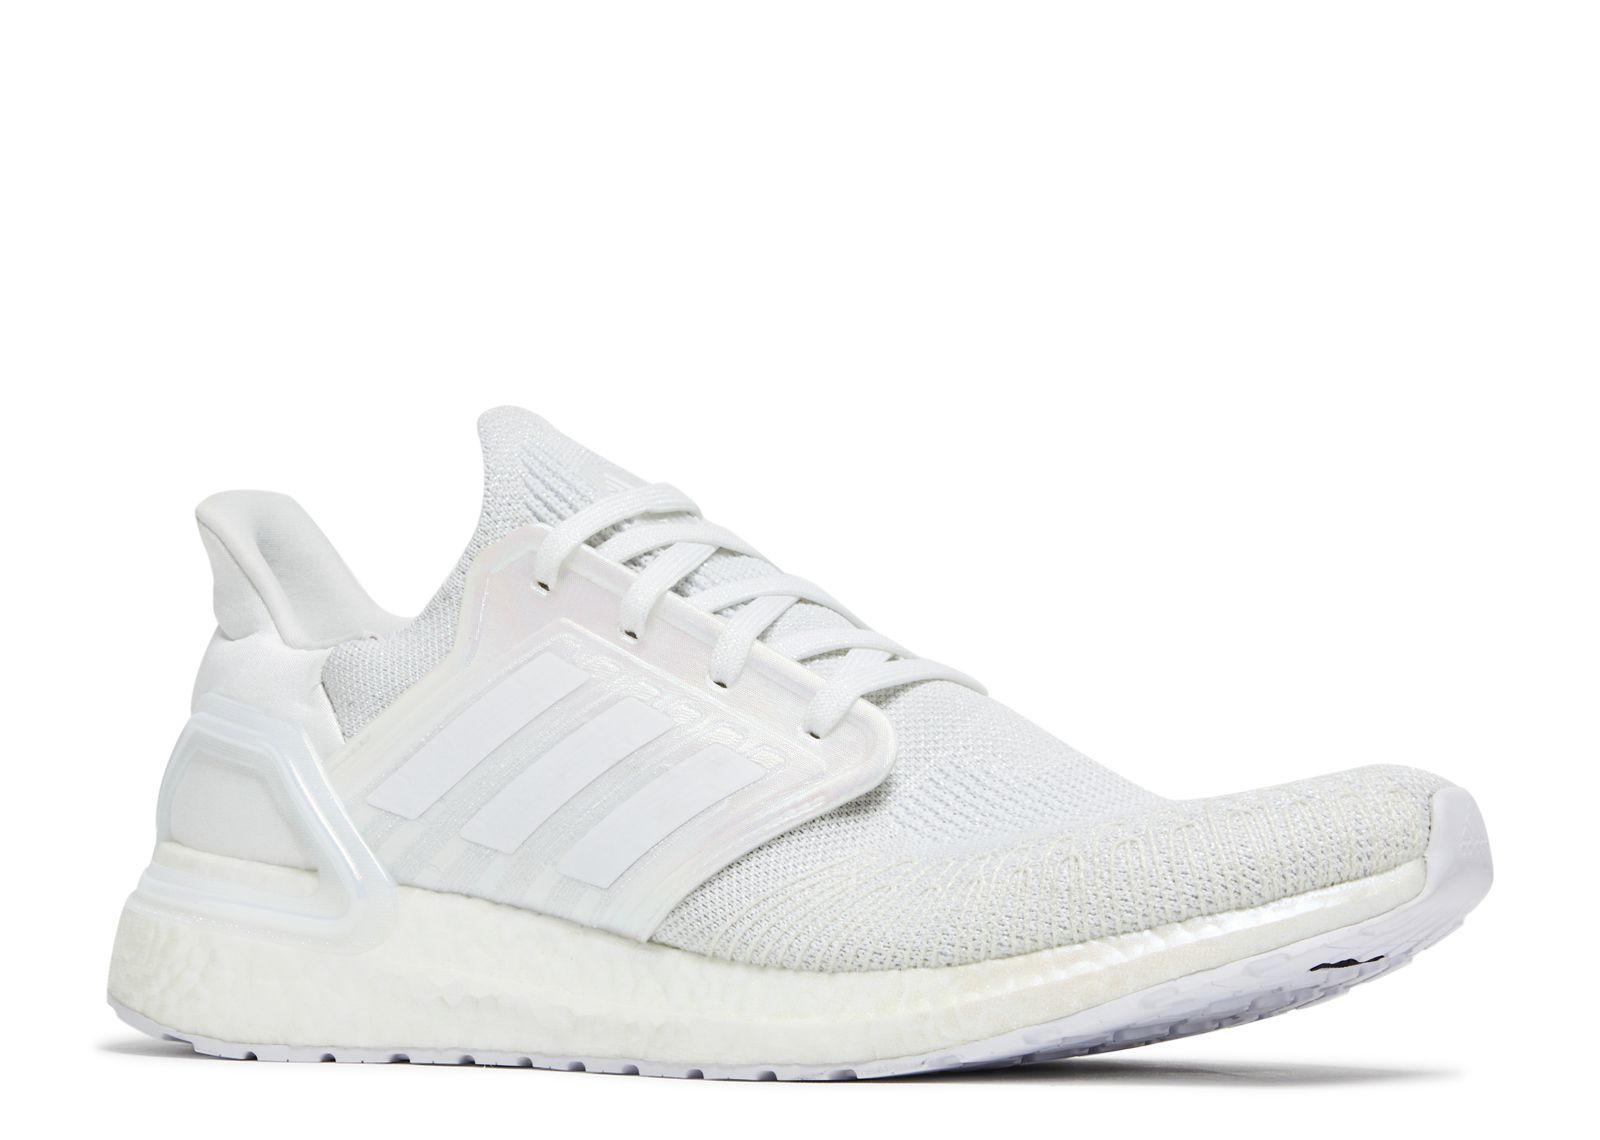 Adidas Ultra Boost 20 Triple White Iridescent Running Shoes FW8721 Mens  Size